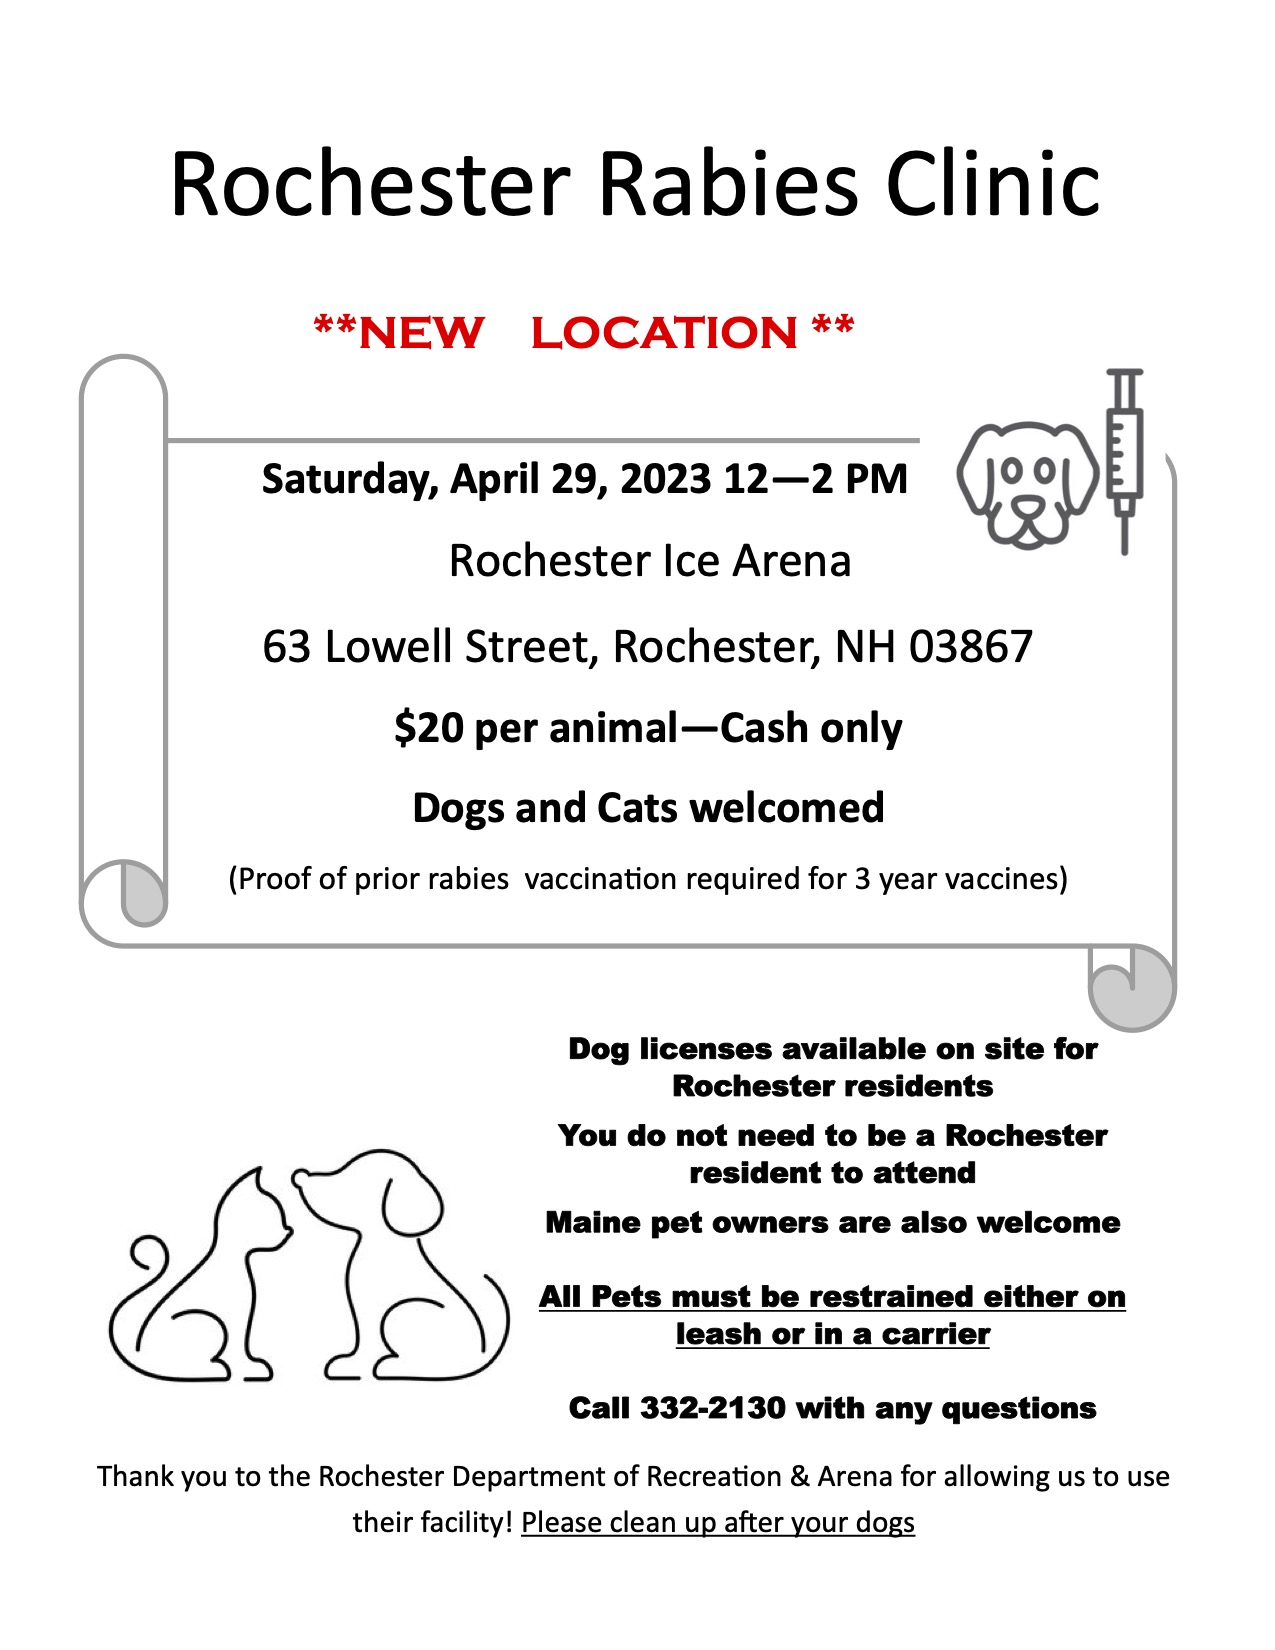 Rabies Clinic scheduled for 4/29 at Rochester Ice Arena The Rochester